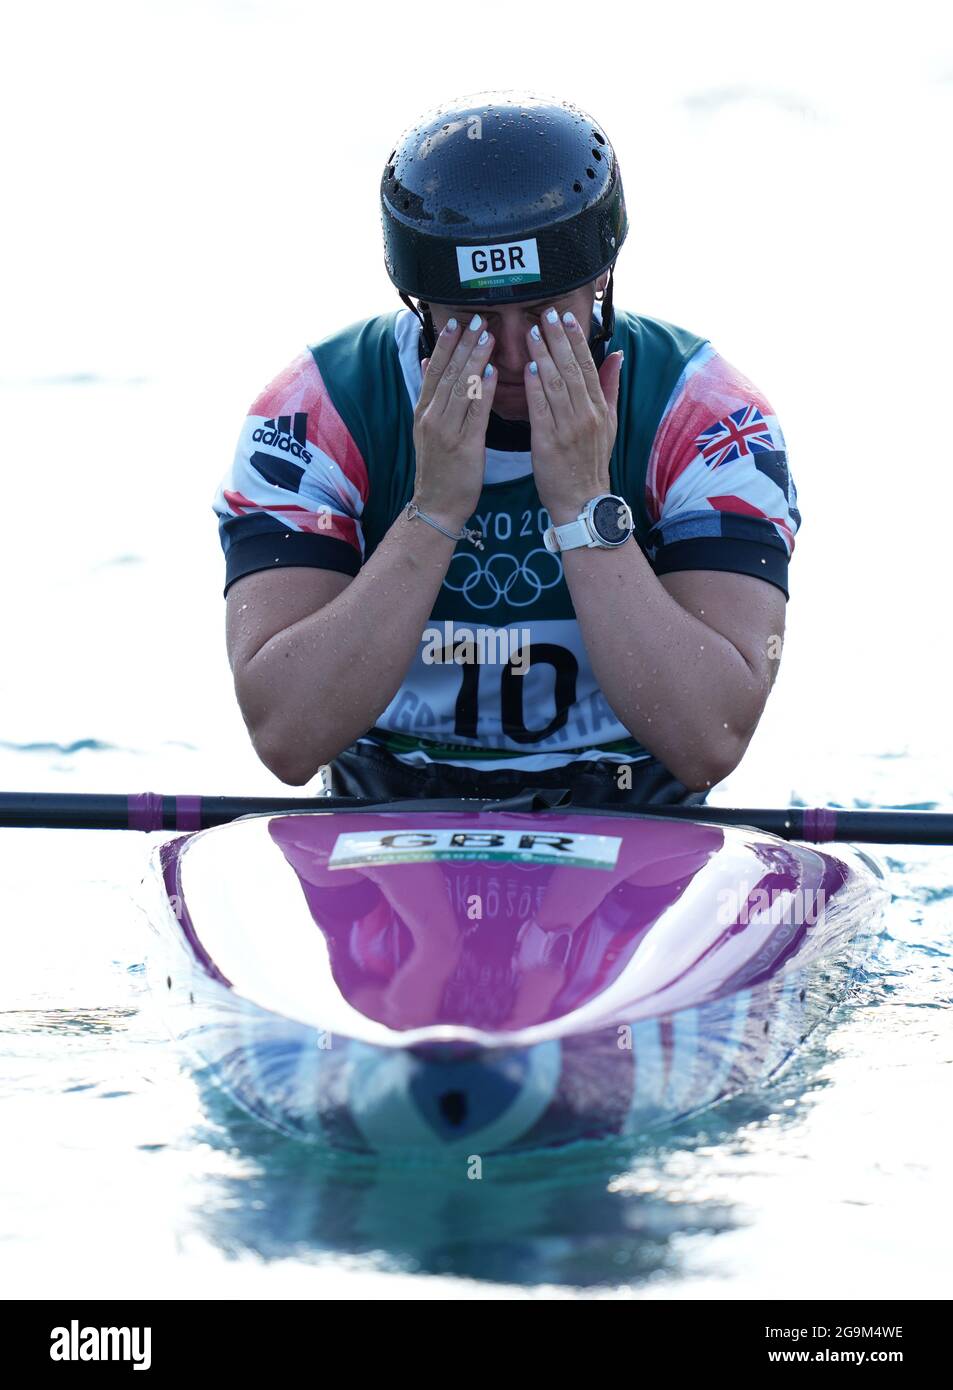 Great Britain's Kimberley Woods appears dejected after the Women's Kayak Final at the Kasai Canoe Slalom Centre on the fourth day of the Tokyo 2020 Olympic Games in Japan. Picture date: Tuesday July 27, 2021. Stock Photo